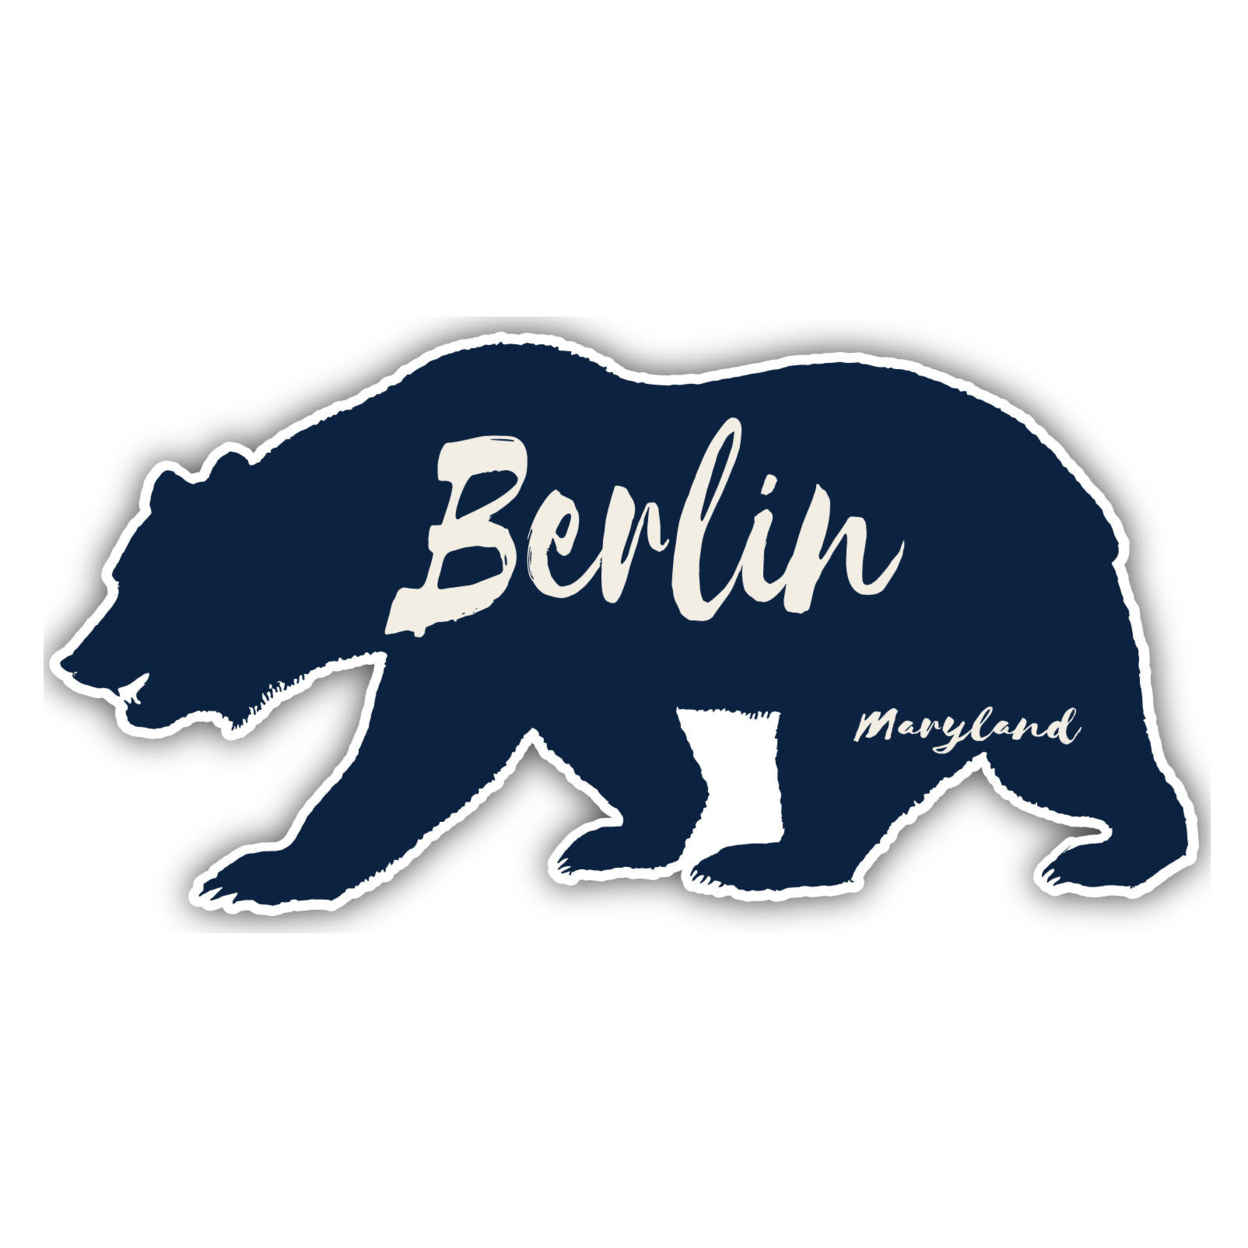 Berlin Maryland Souvenir Decorative Stickers (Choose Theme And Size) - 4-Pack, 6-Inch, Bear